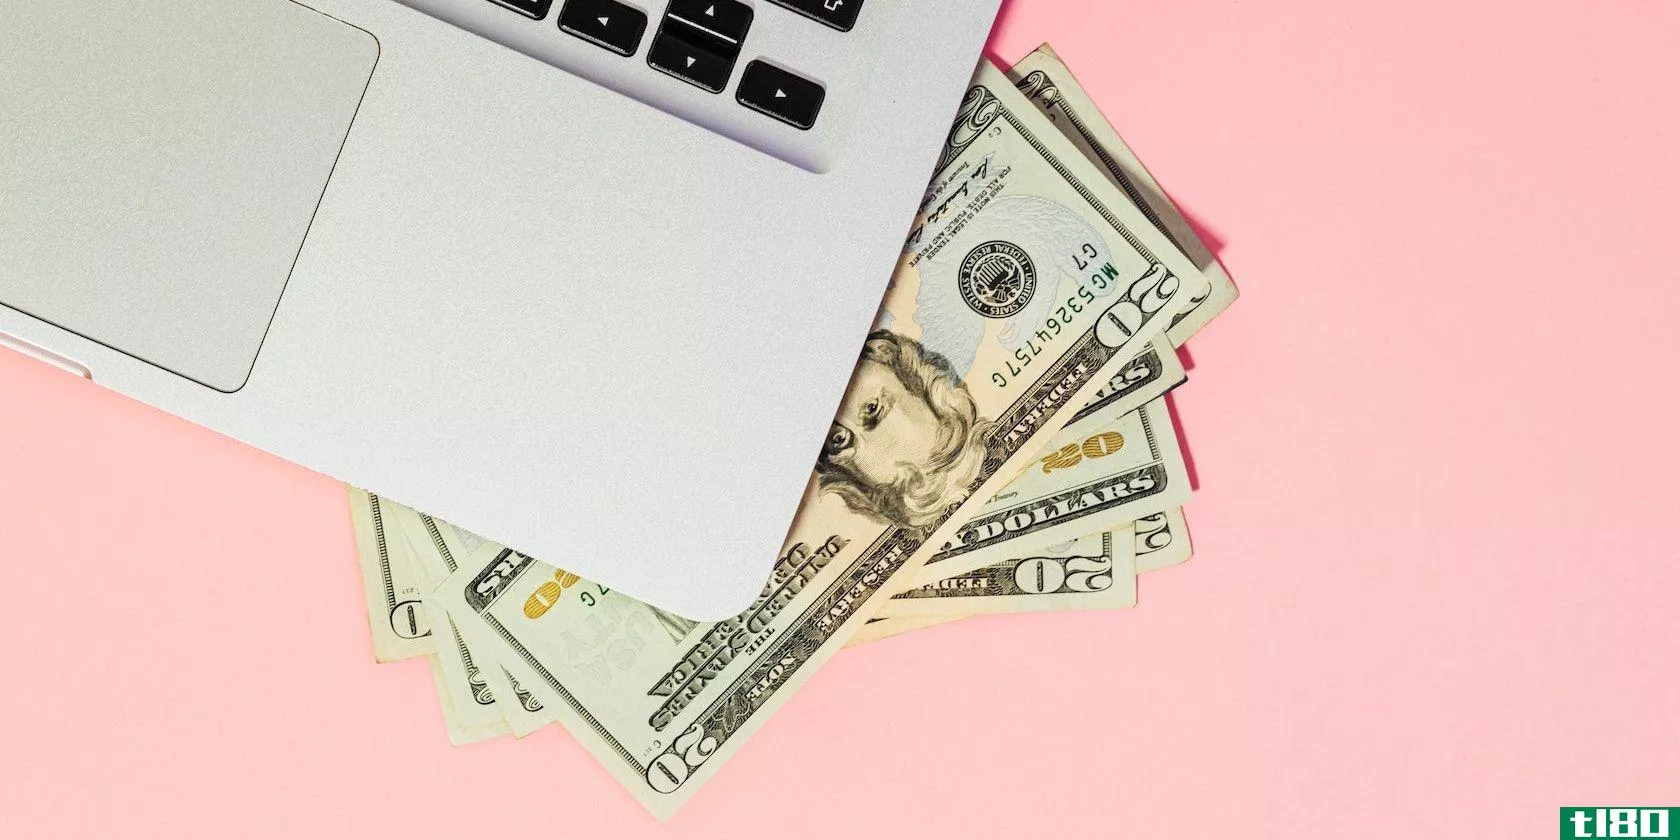 mac laptop and money in notes